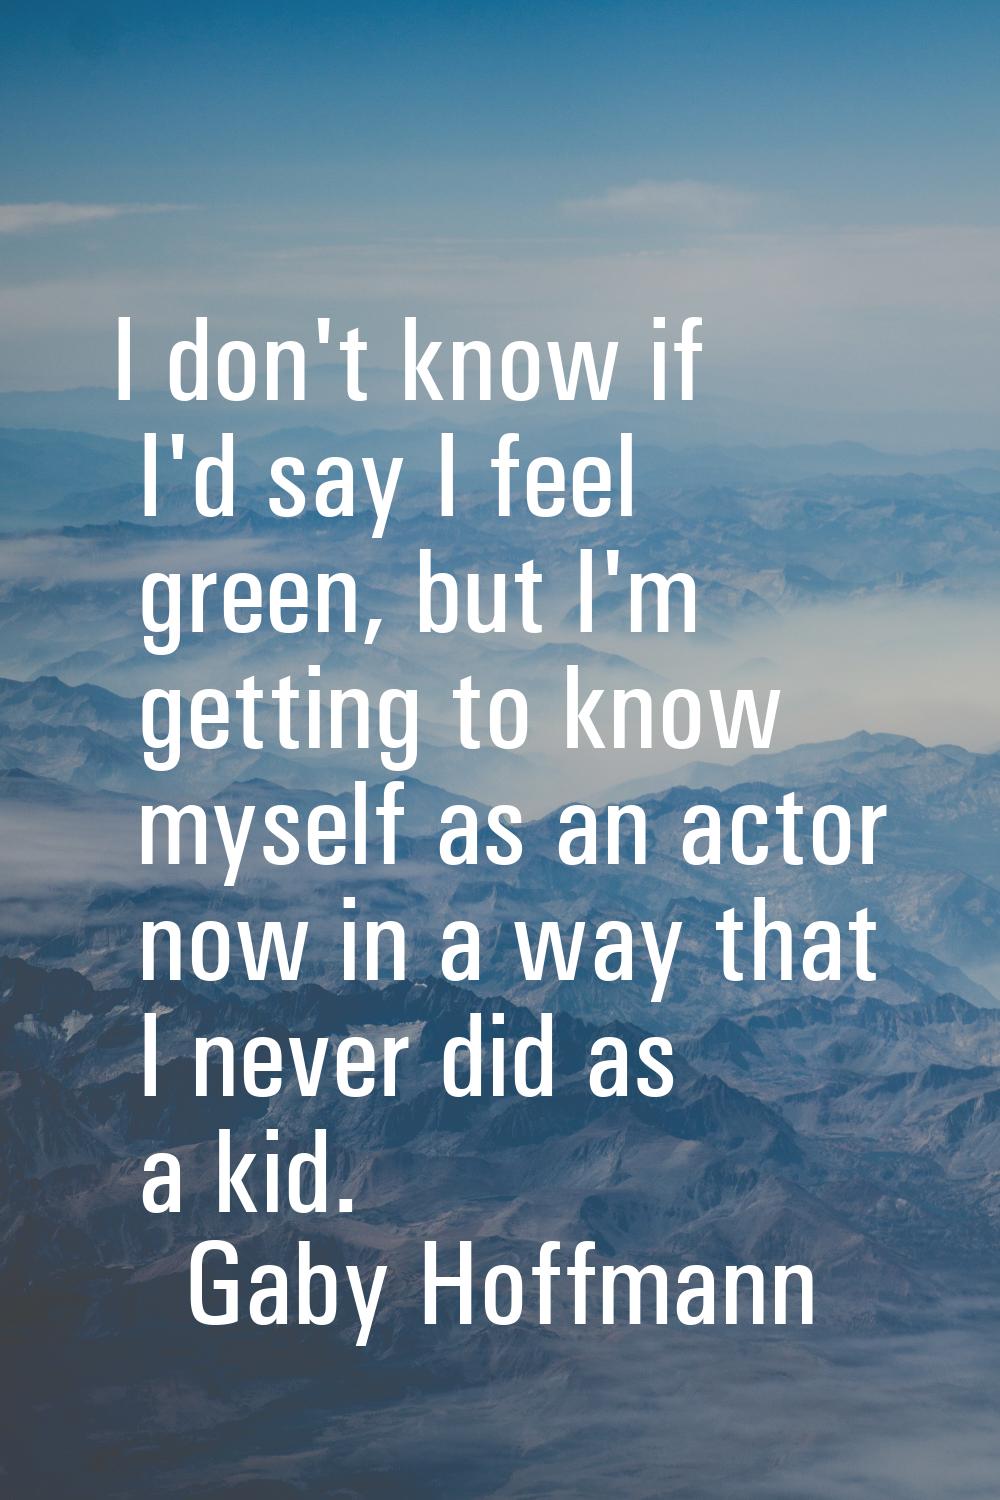 I don't know if I'd say I feel green, but I'm getting to know myself as an actor now in a way that 